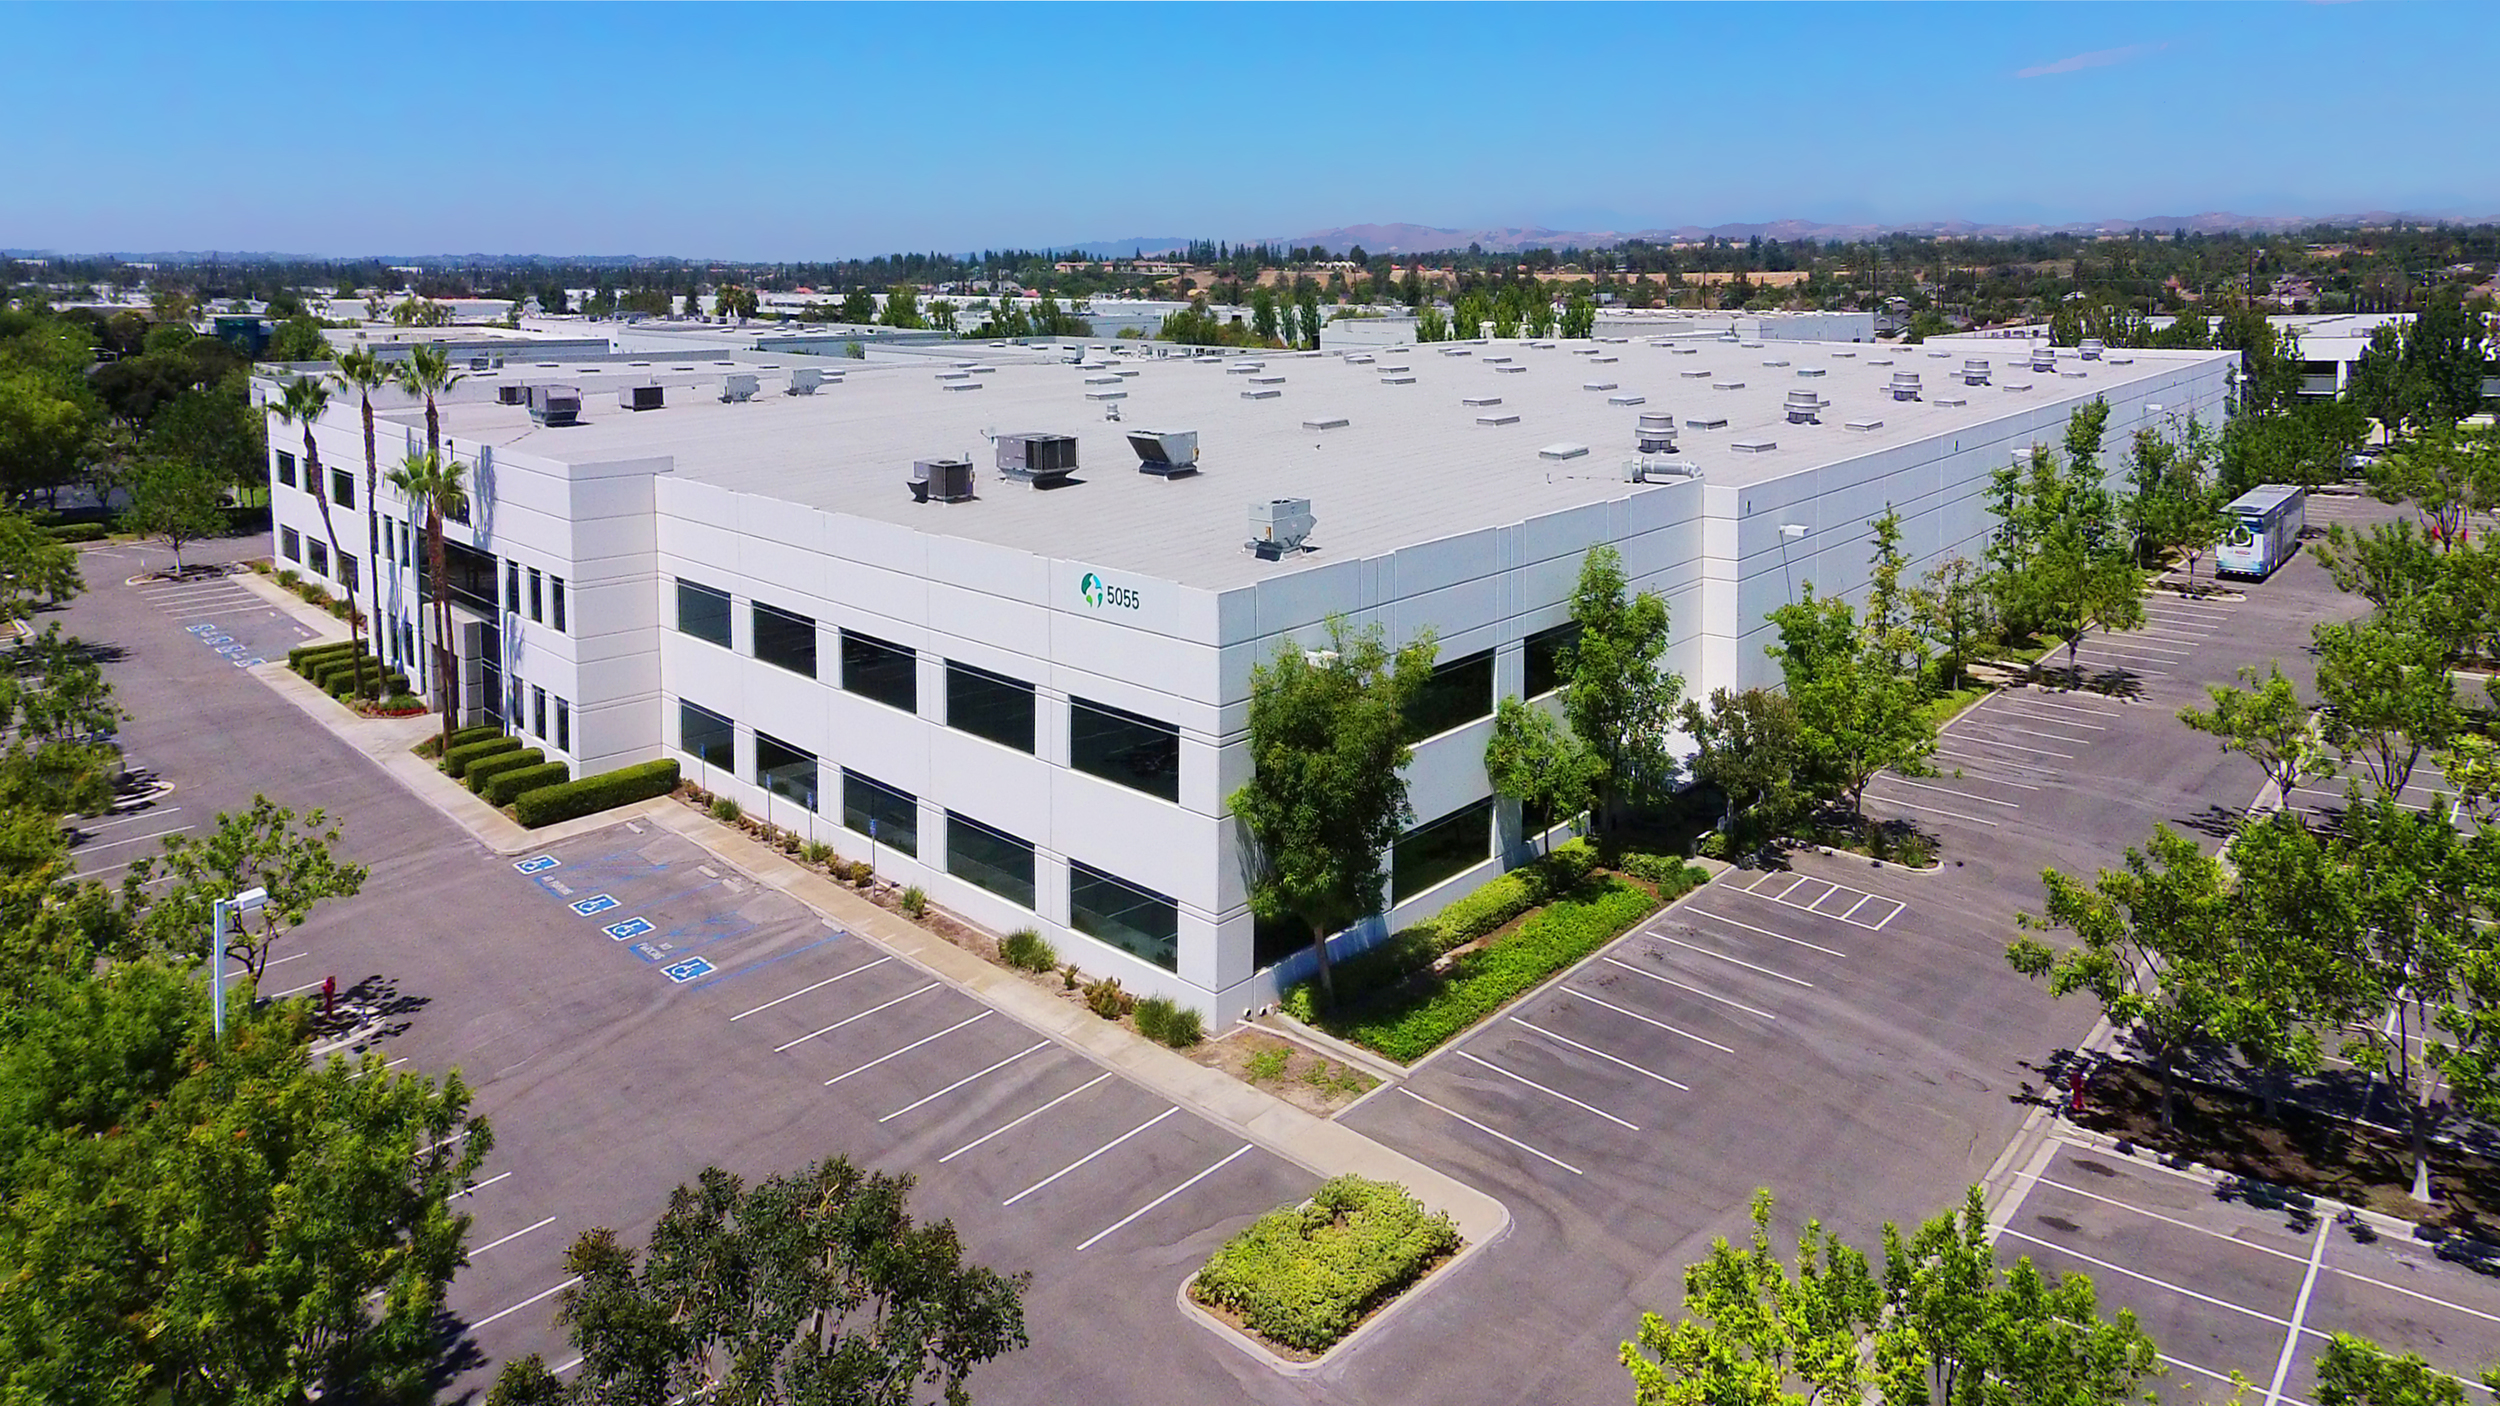 Commercial Real Estate Drone Video For Sale OFF 67%, 50% OFF